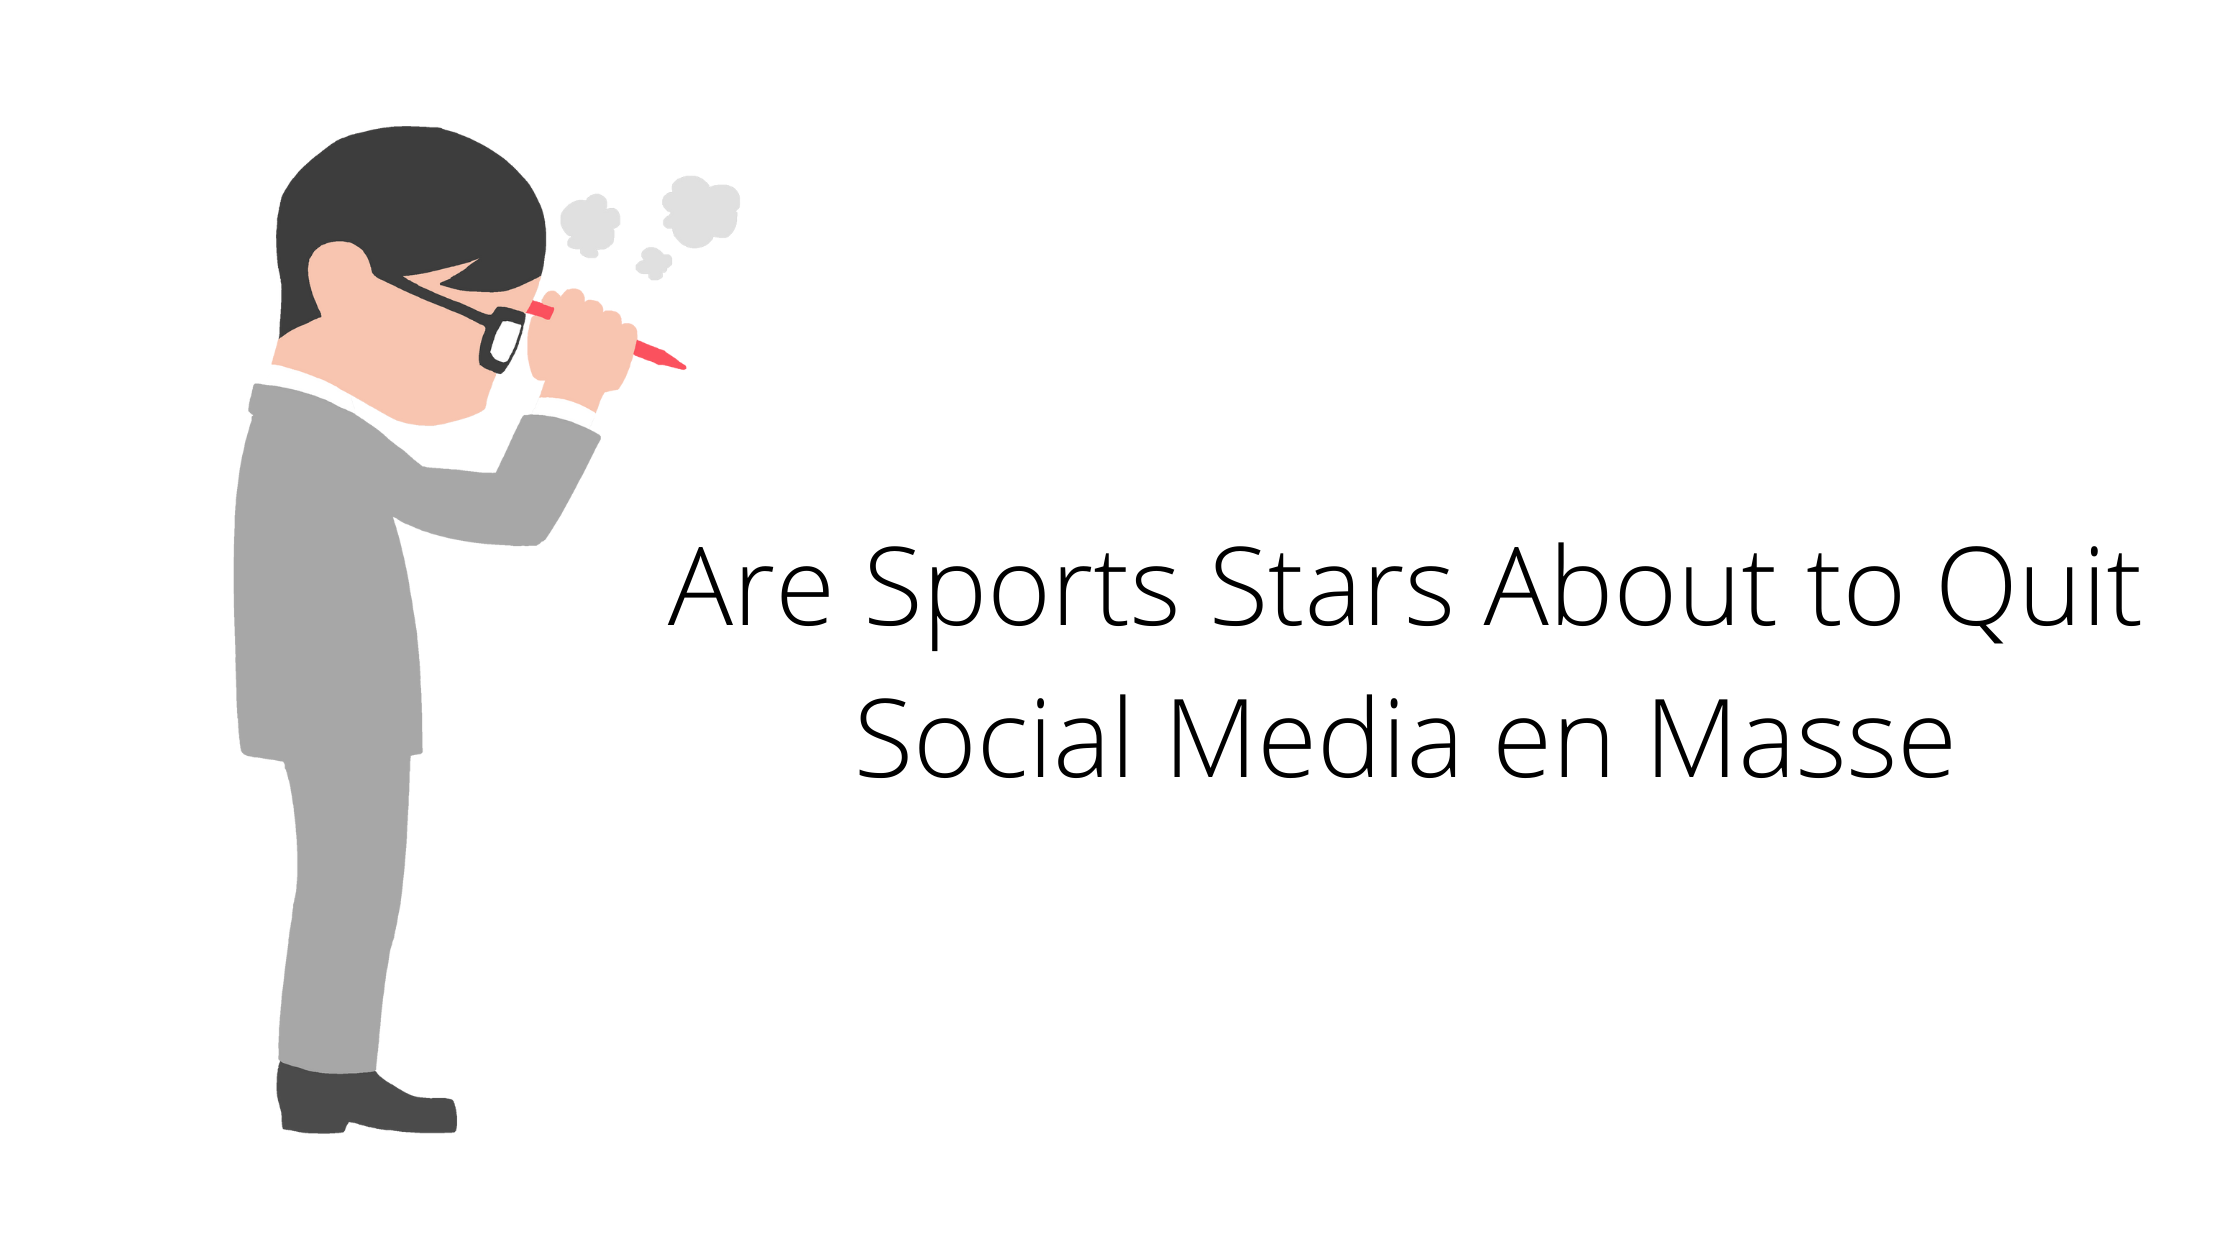 Are Sports Stars About to Quit Social Media en Masse